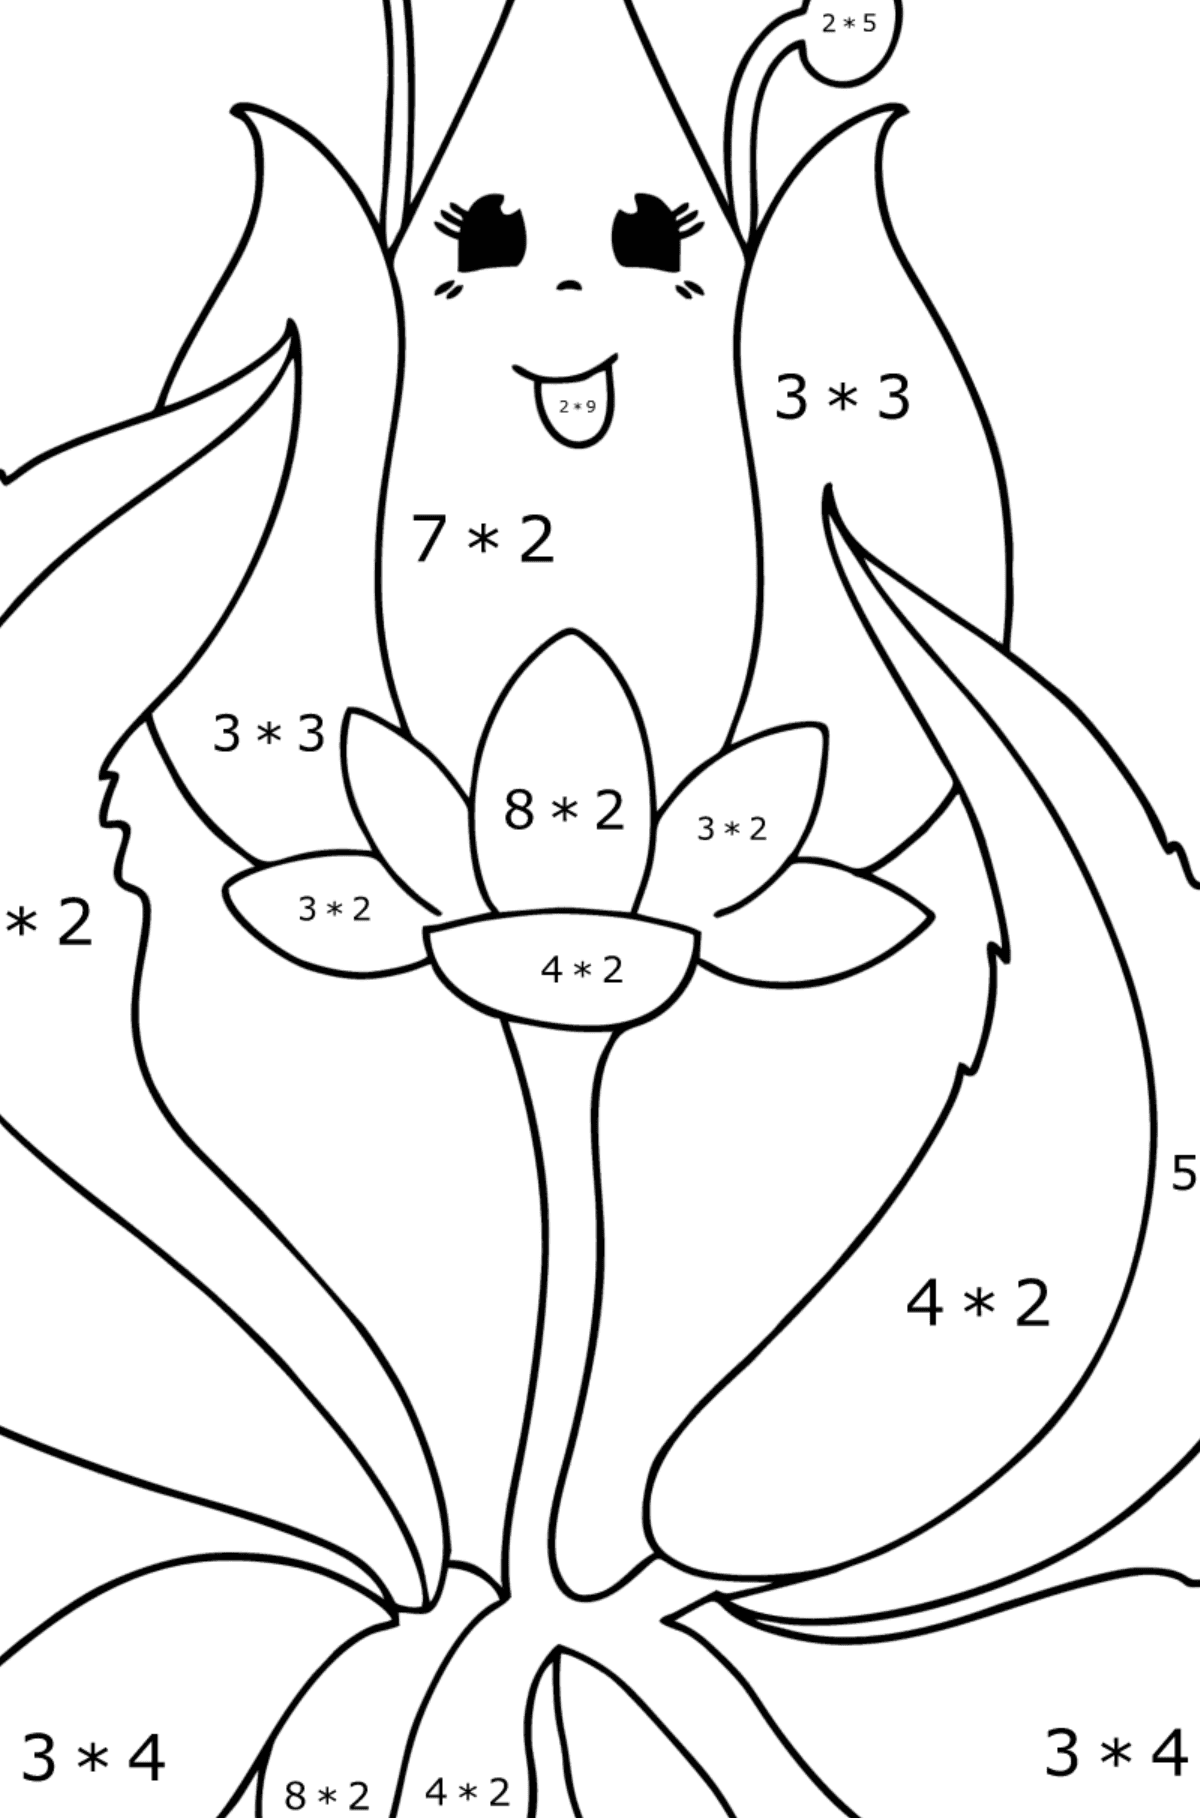 Bud with eyes coloring page - Math Coloring - Multiplication for Kids